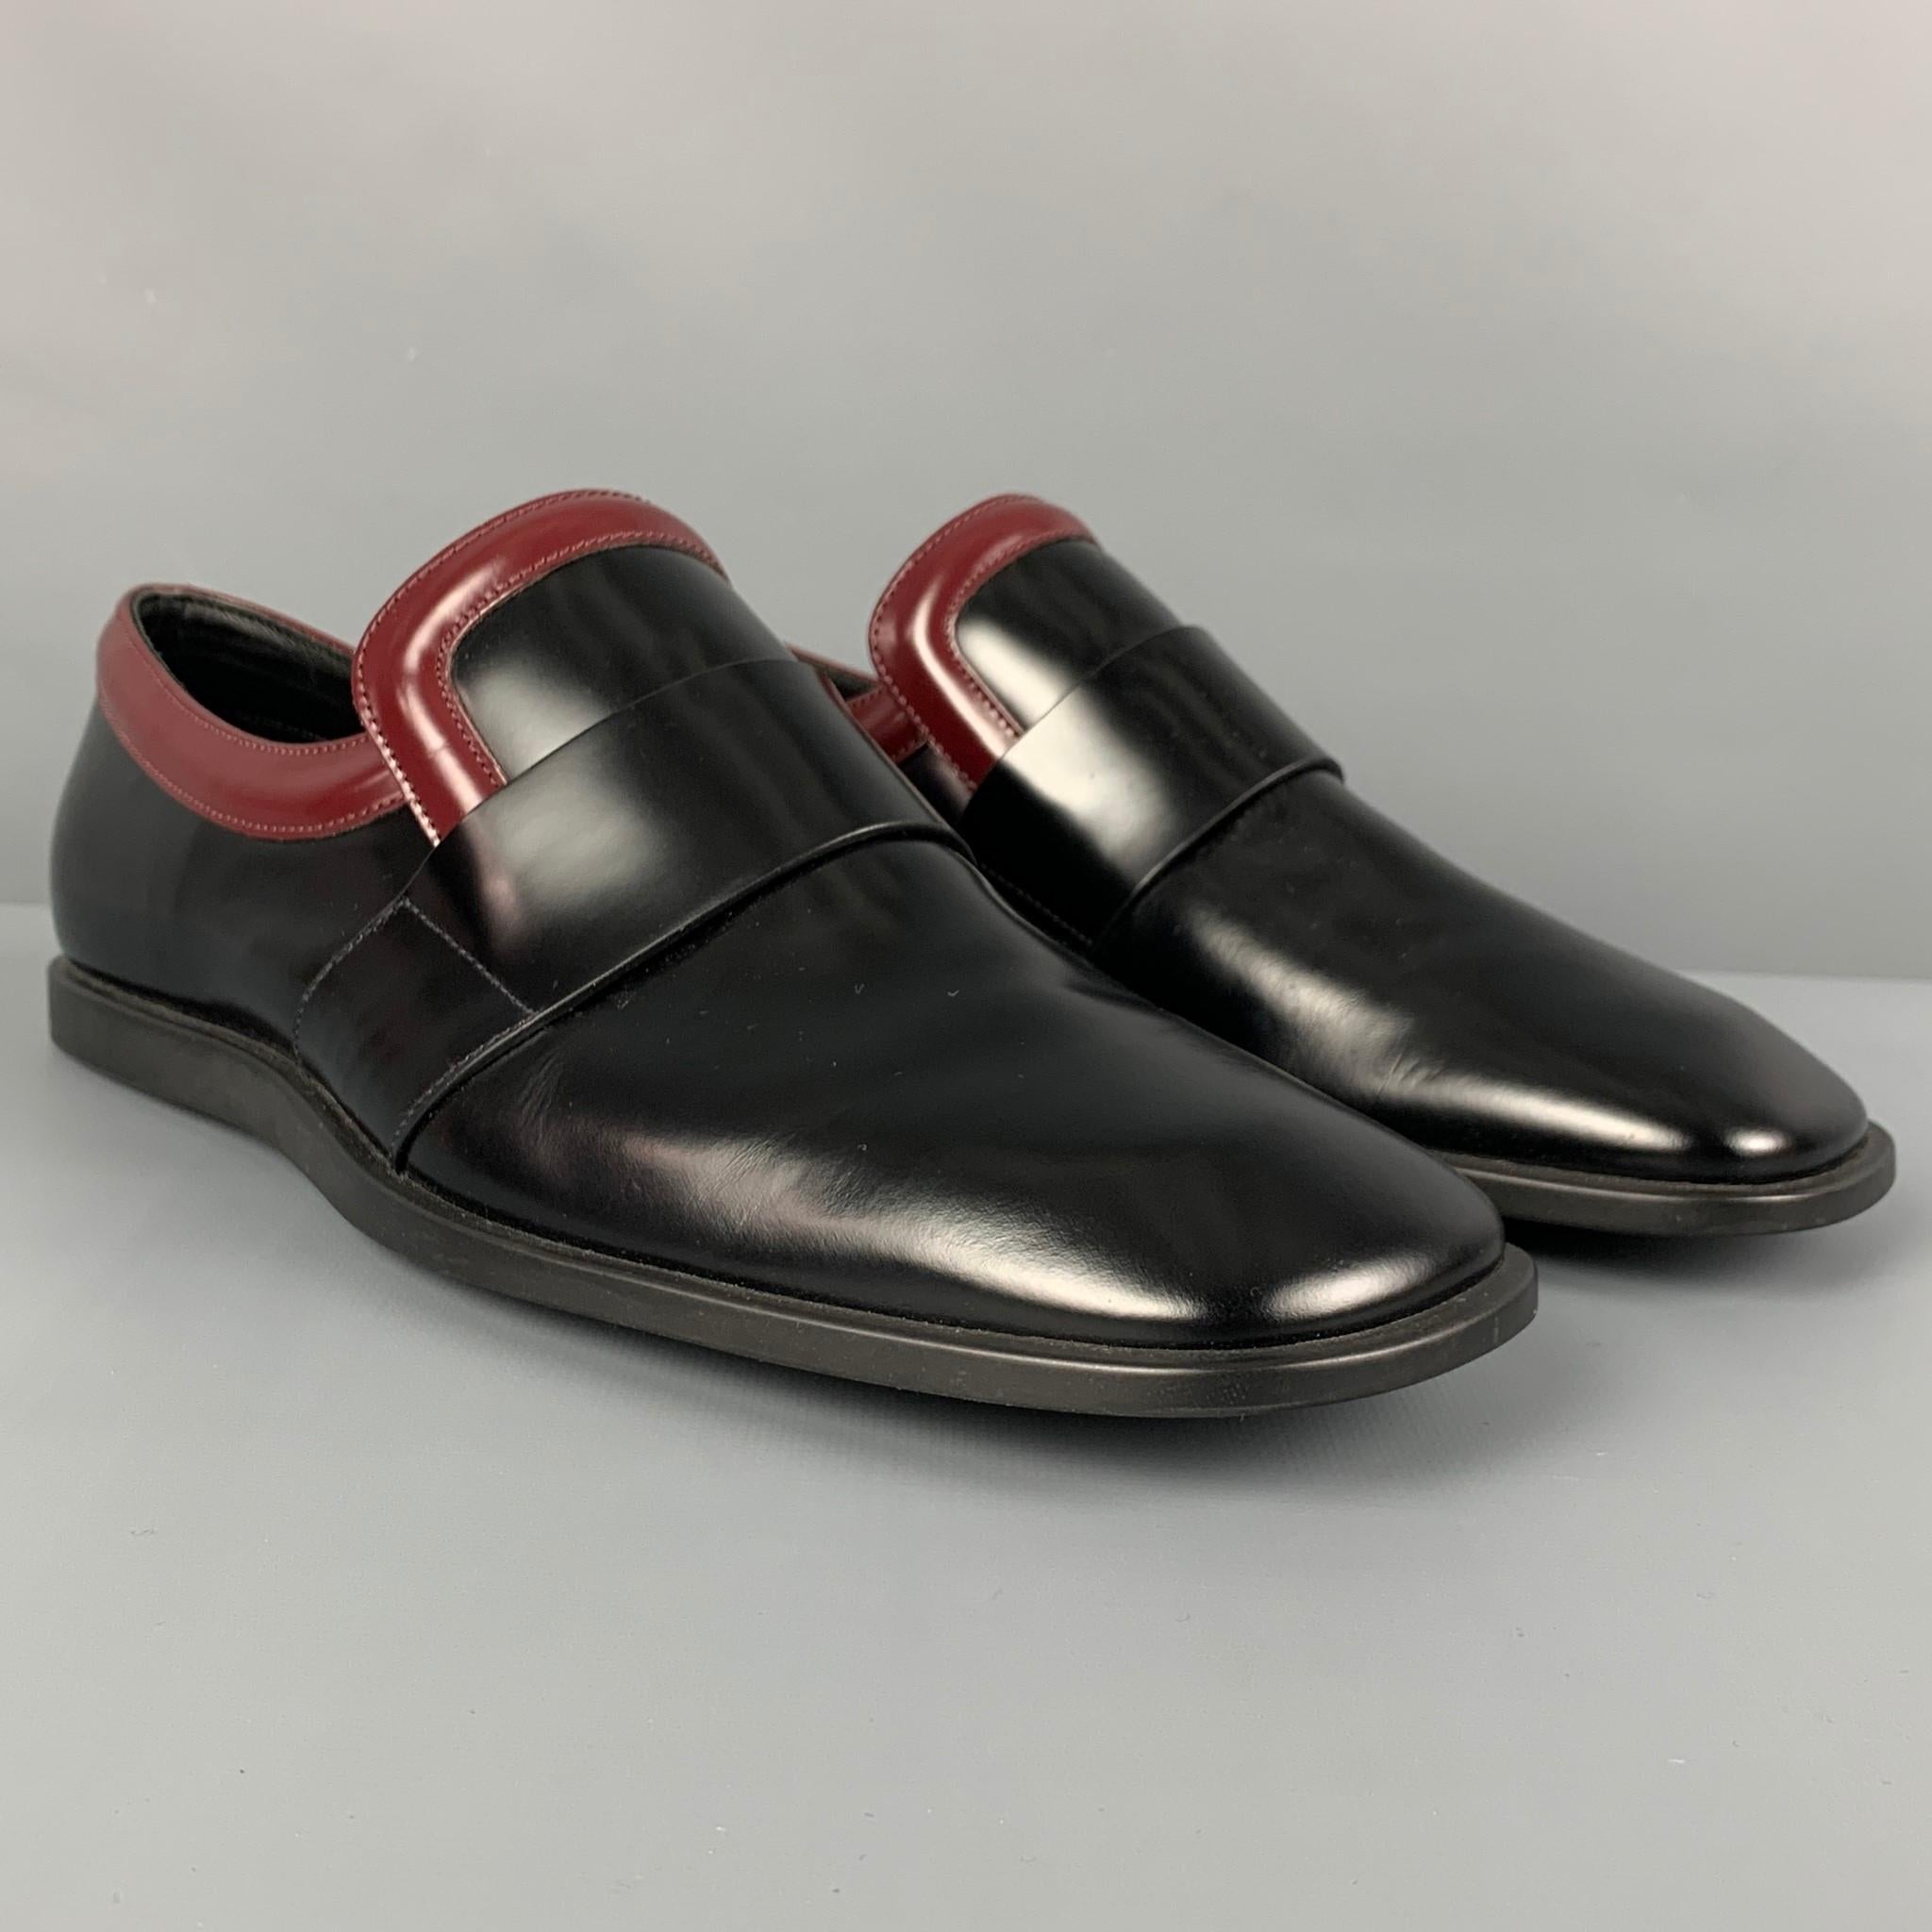 PRADA loafers comes in a black & burgundy two toned leather featuring a square toe and a leather sole. Made in Italy. 

New Without Tags.
Marked: 2 DG 024 7.5
Original Retail Price: $925.00

Outsole: 11.5 in. x 4 in. 